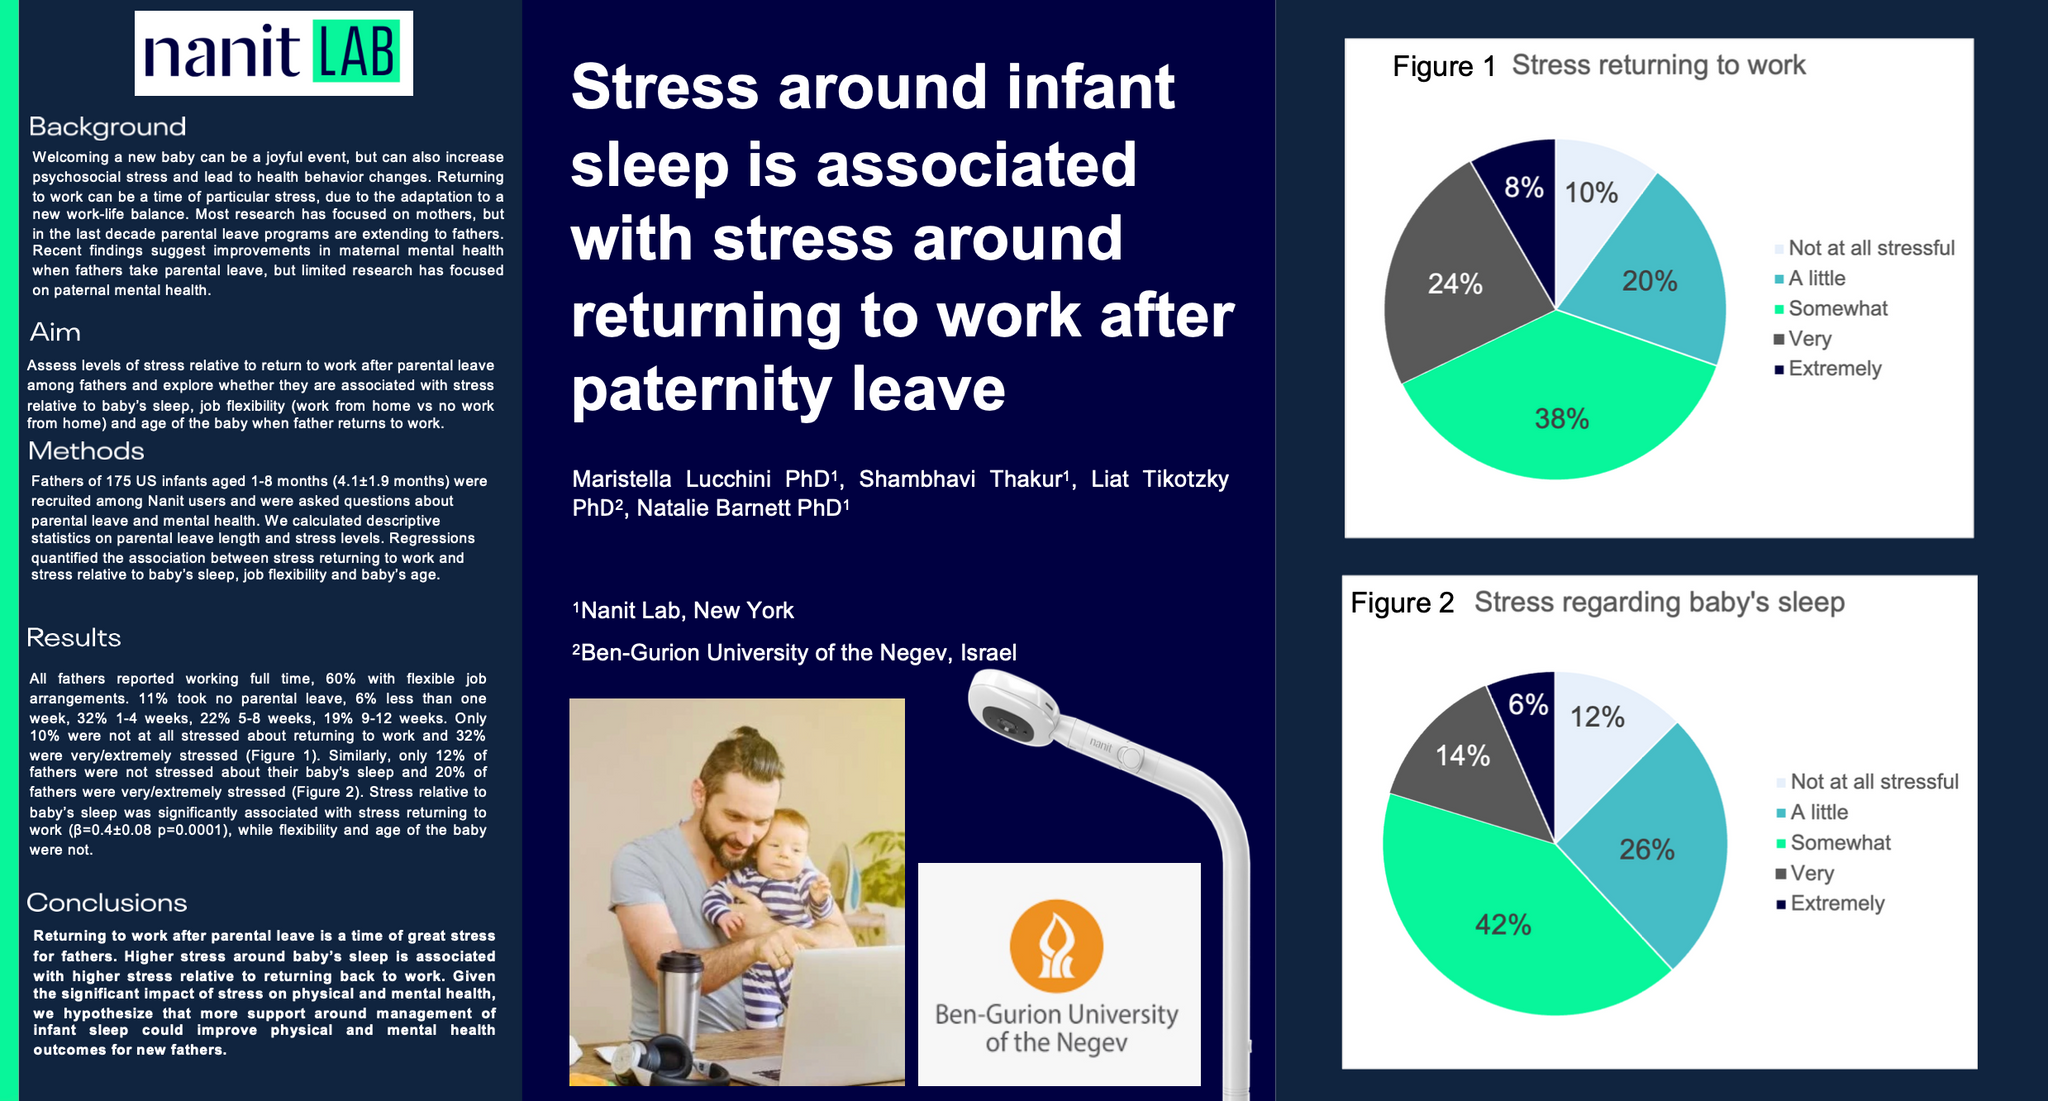 Stress around infant sleep is associated with stress around returning to work after paternity leave